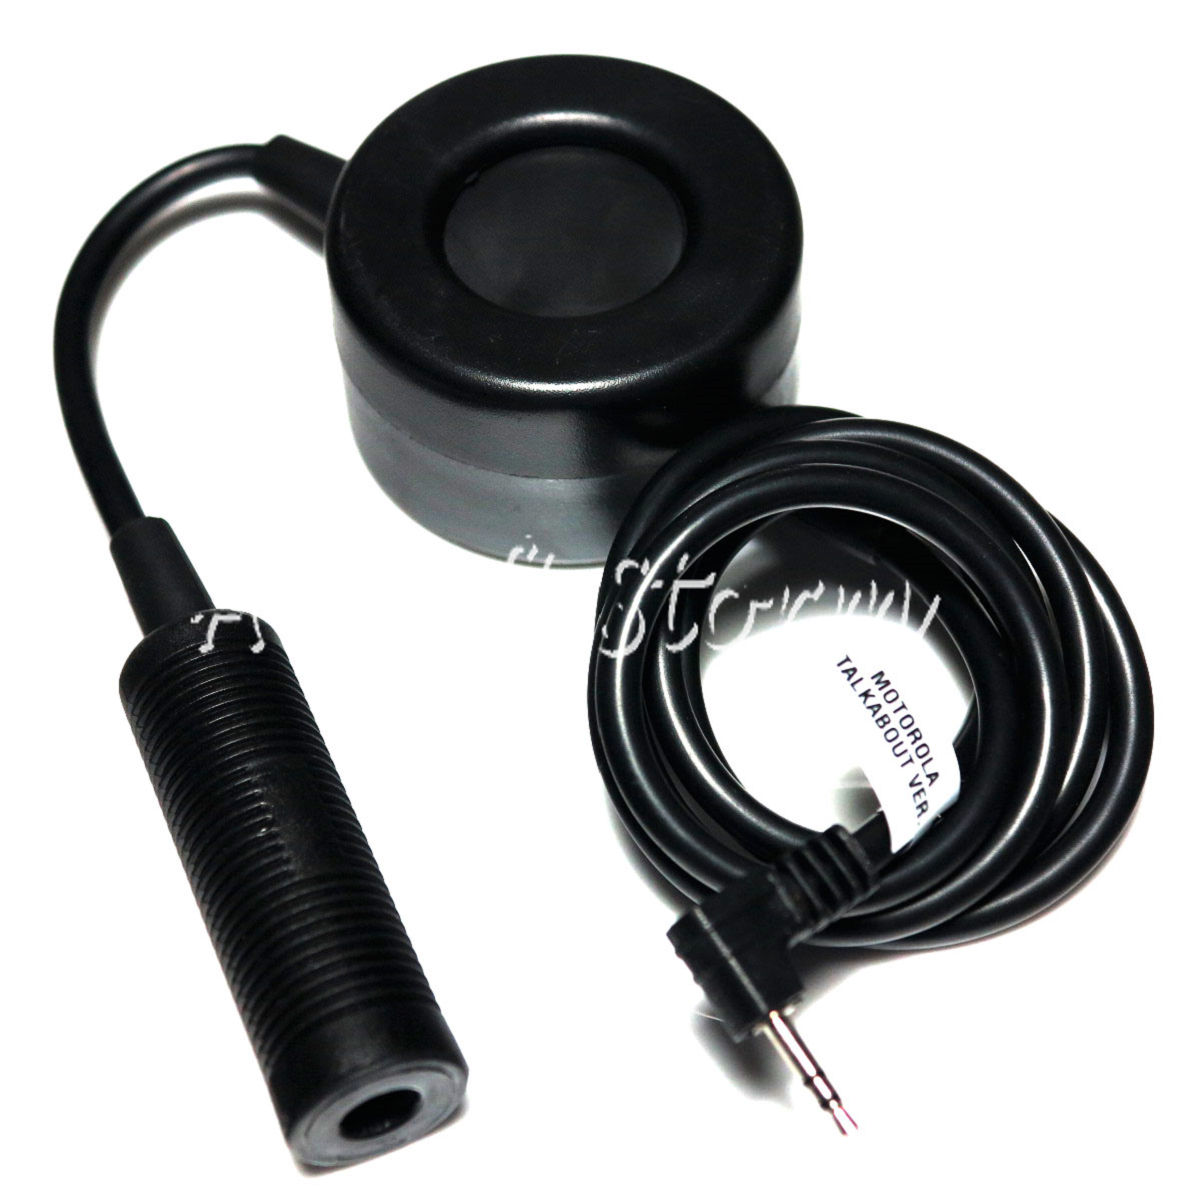 Airsoft Gear SWAT Element TCI Headset PTT for Motorola Talkabout Radio